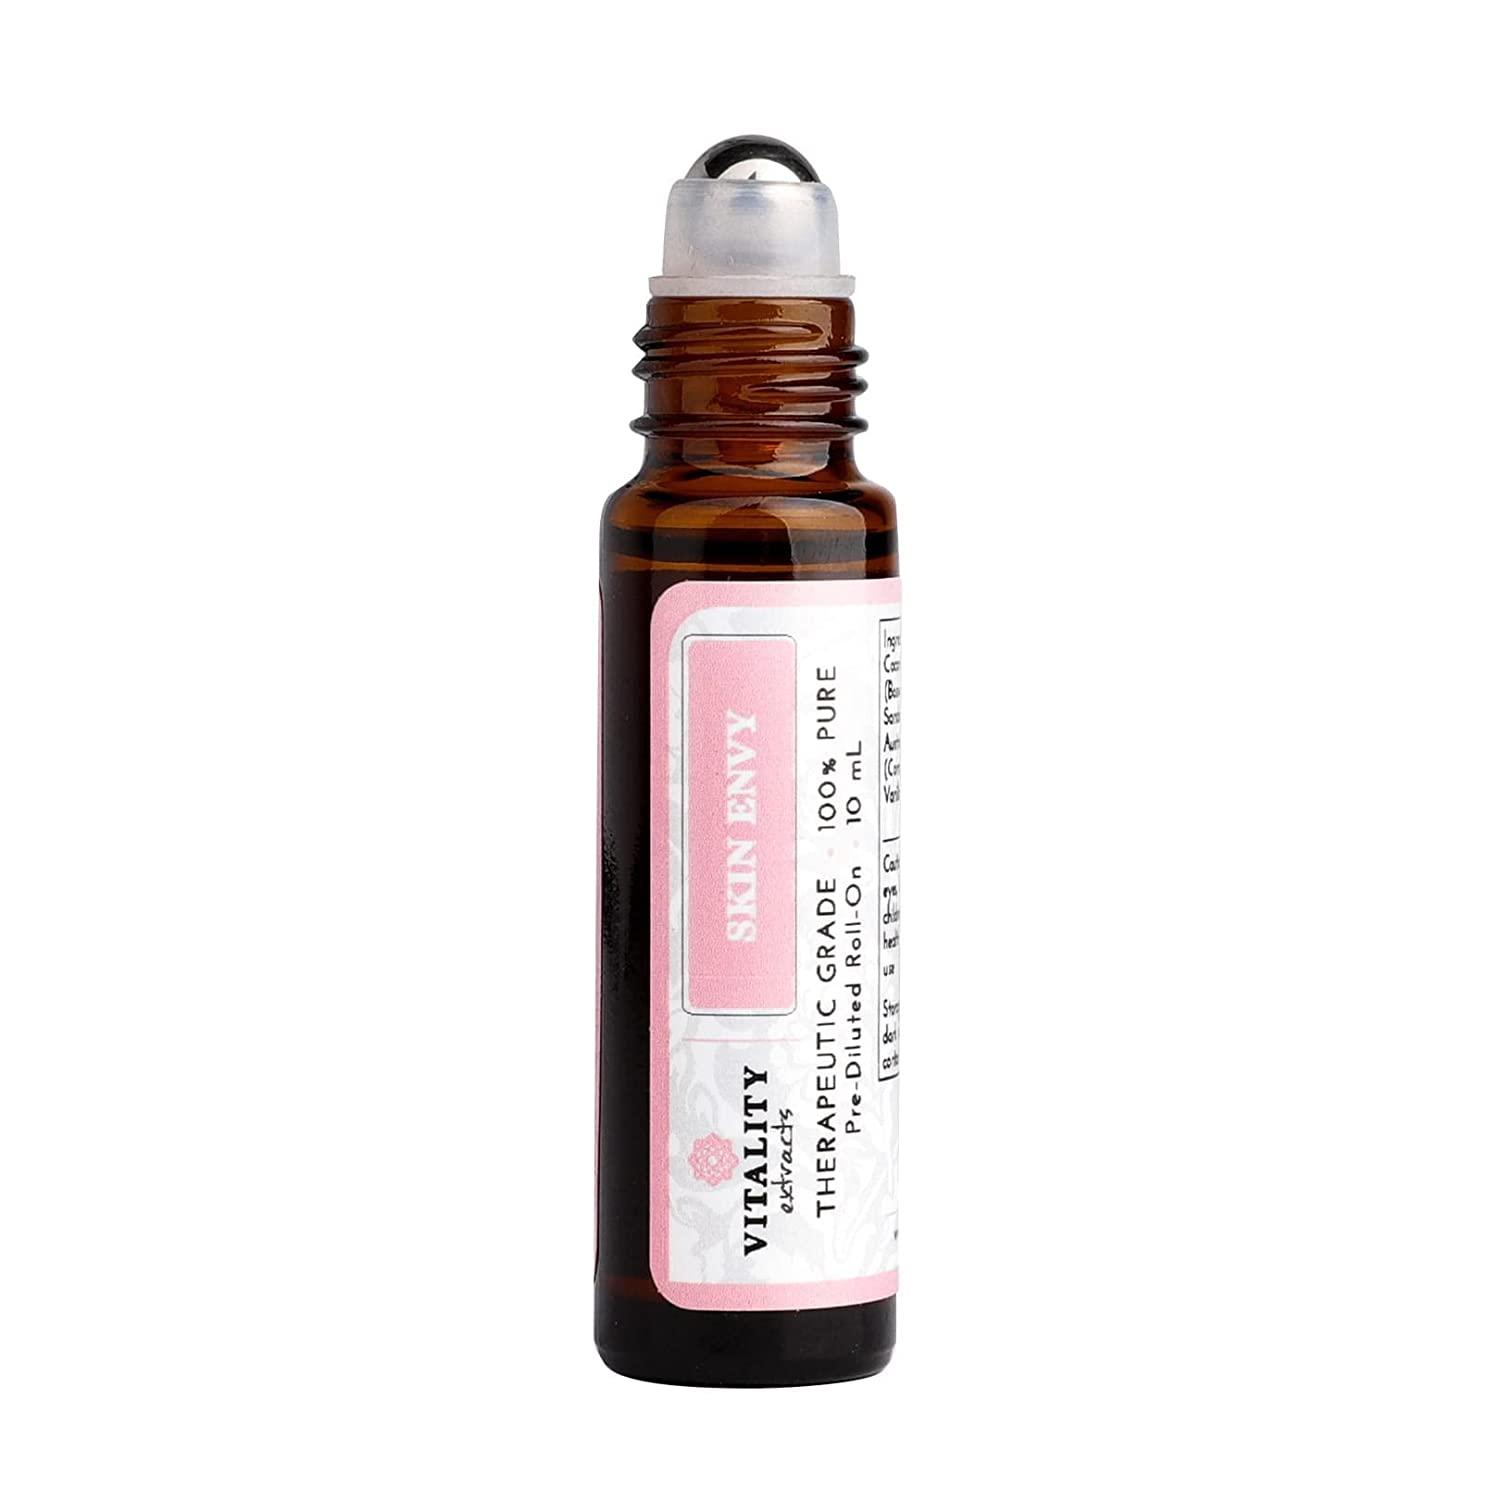 Skin Envy - Face Moisturizer Serum (by Vitality Extracts